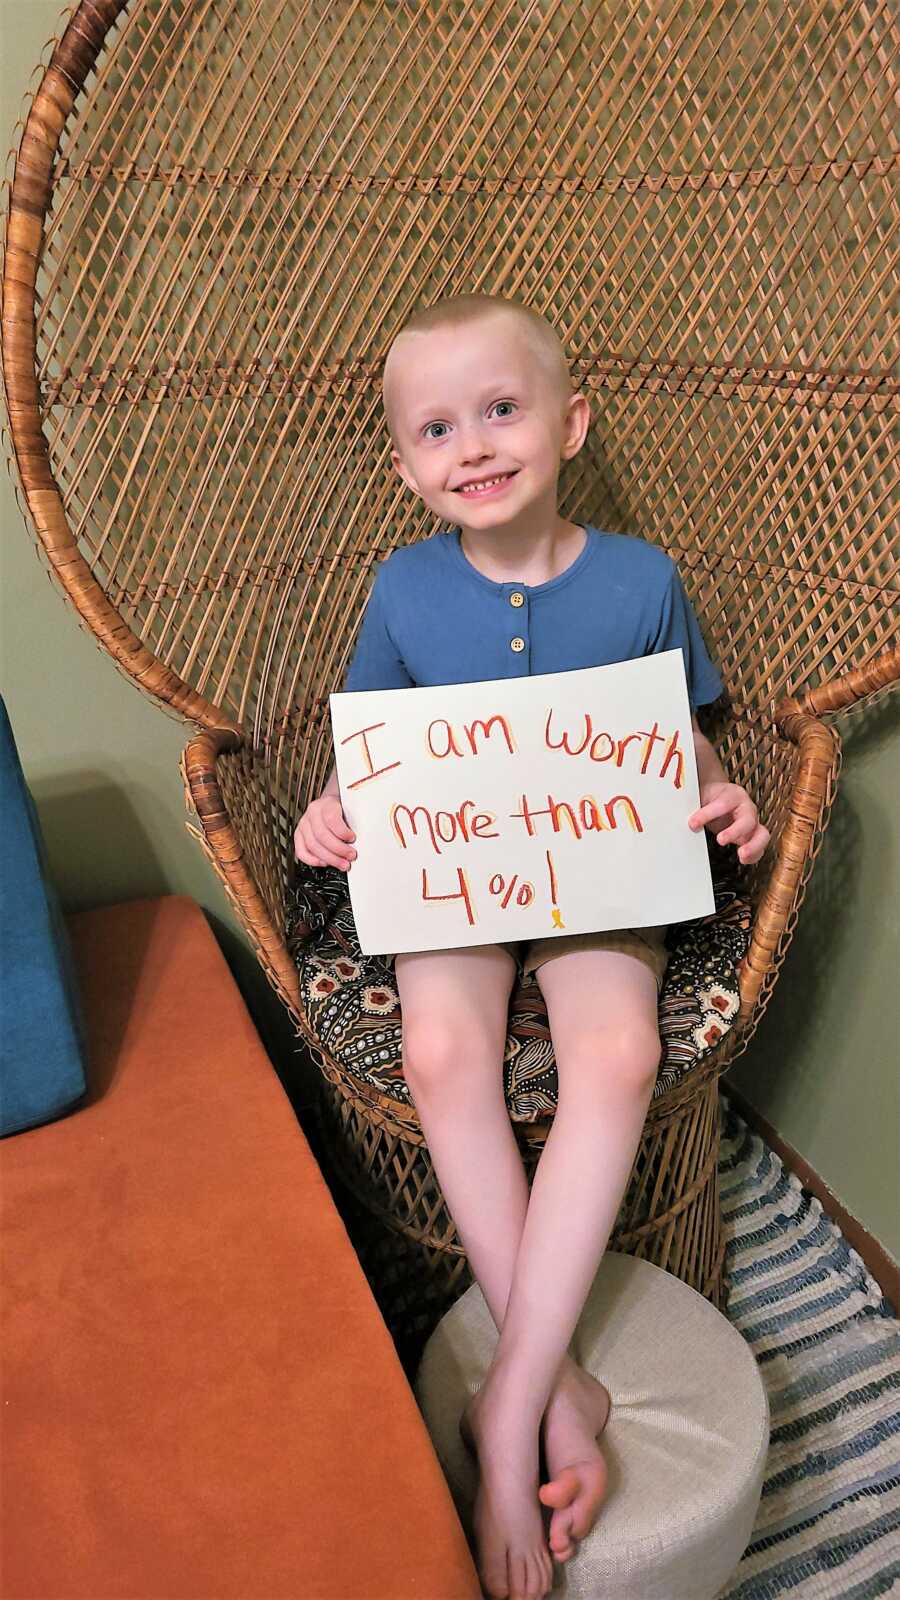 5-year-old caner survivor holding a sign that says 'I am worth more than 4%' referring to the 4% of funds that go to childhood cancer research